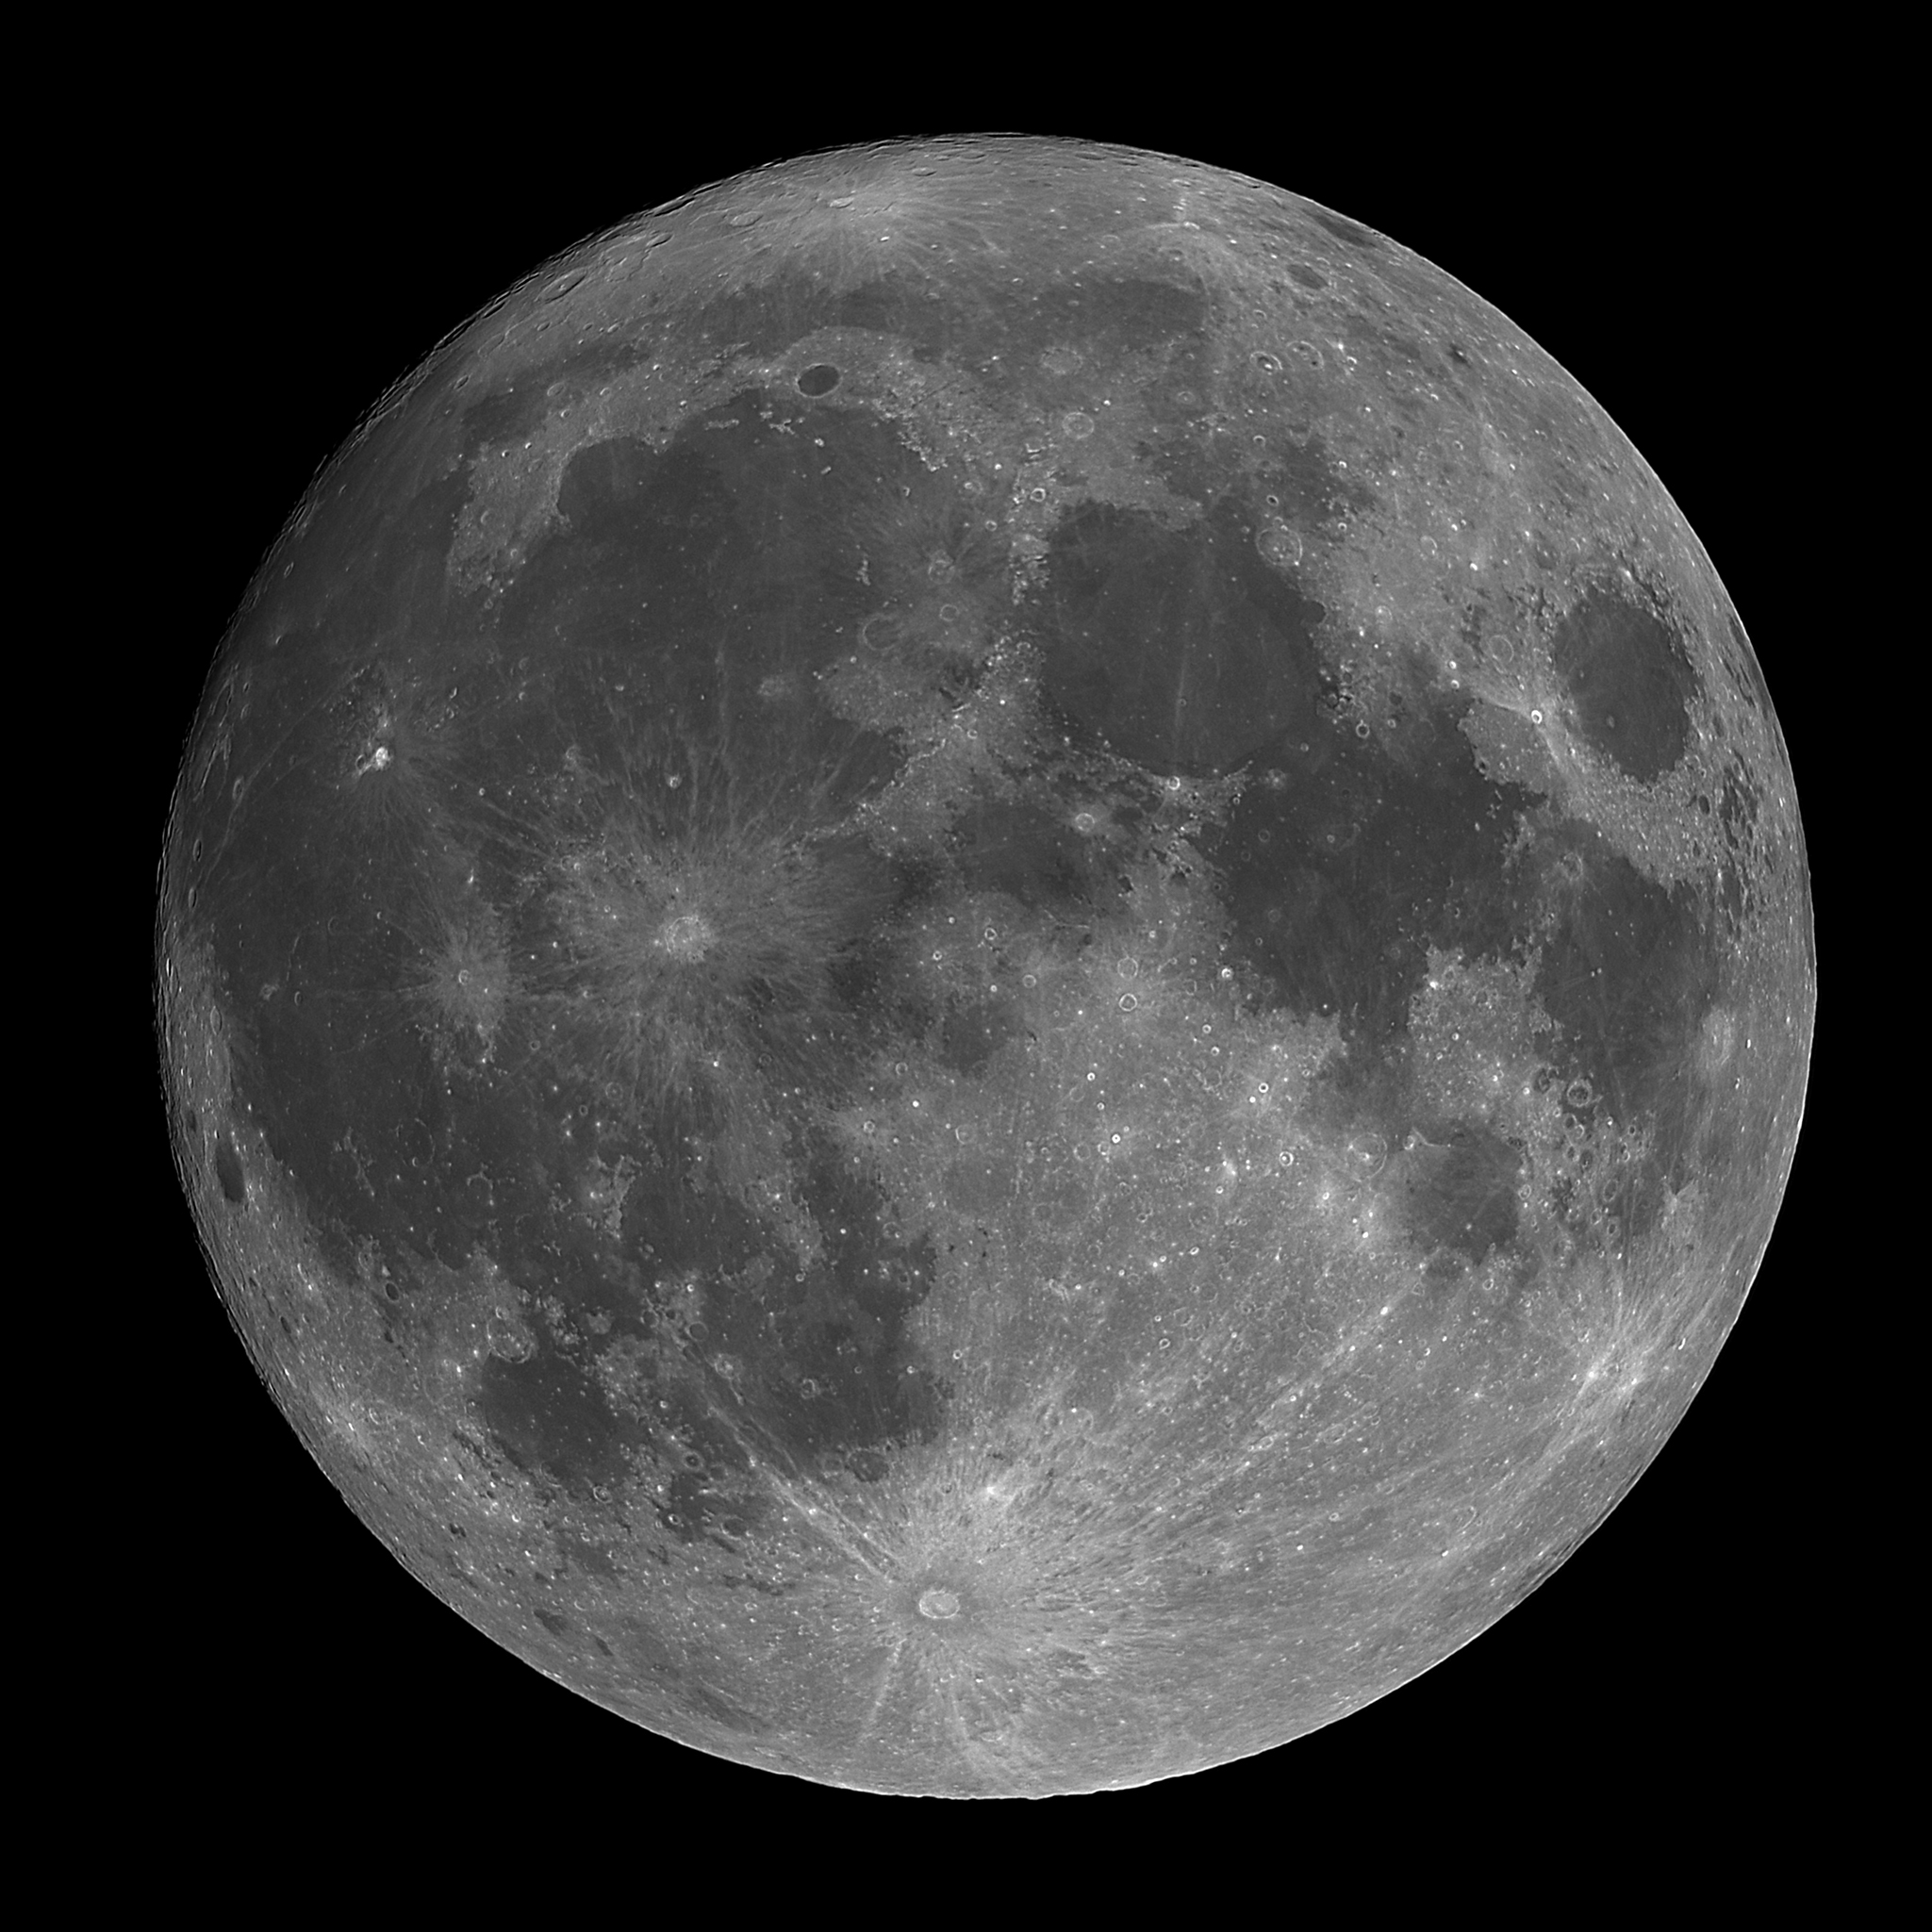 Header image: Astrophotography image of the full Moon, captured by the Adler Planetarium’s Theaters Manager, Nick Lake.